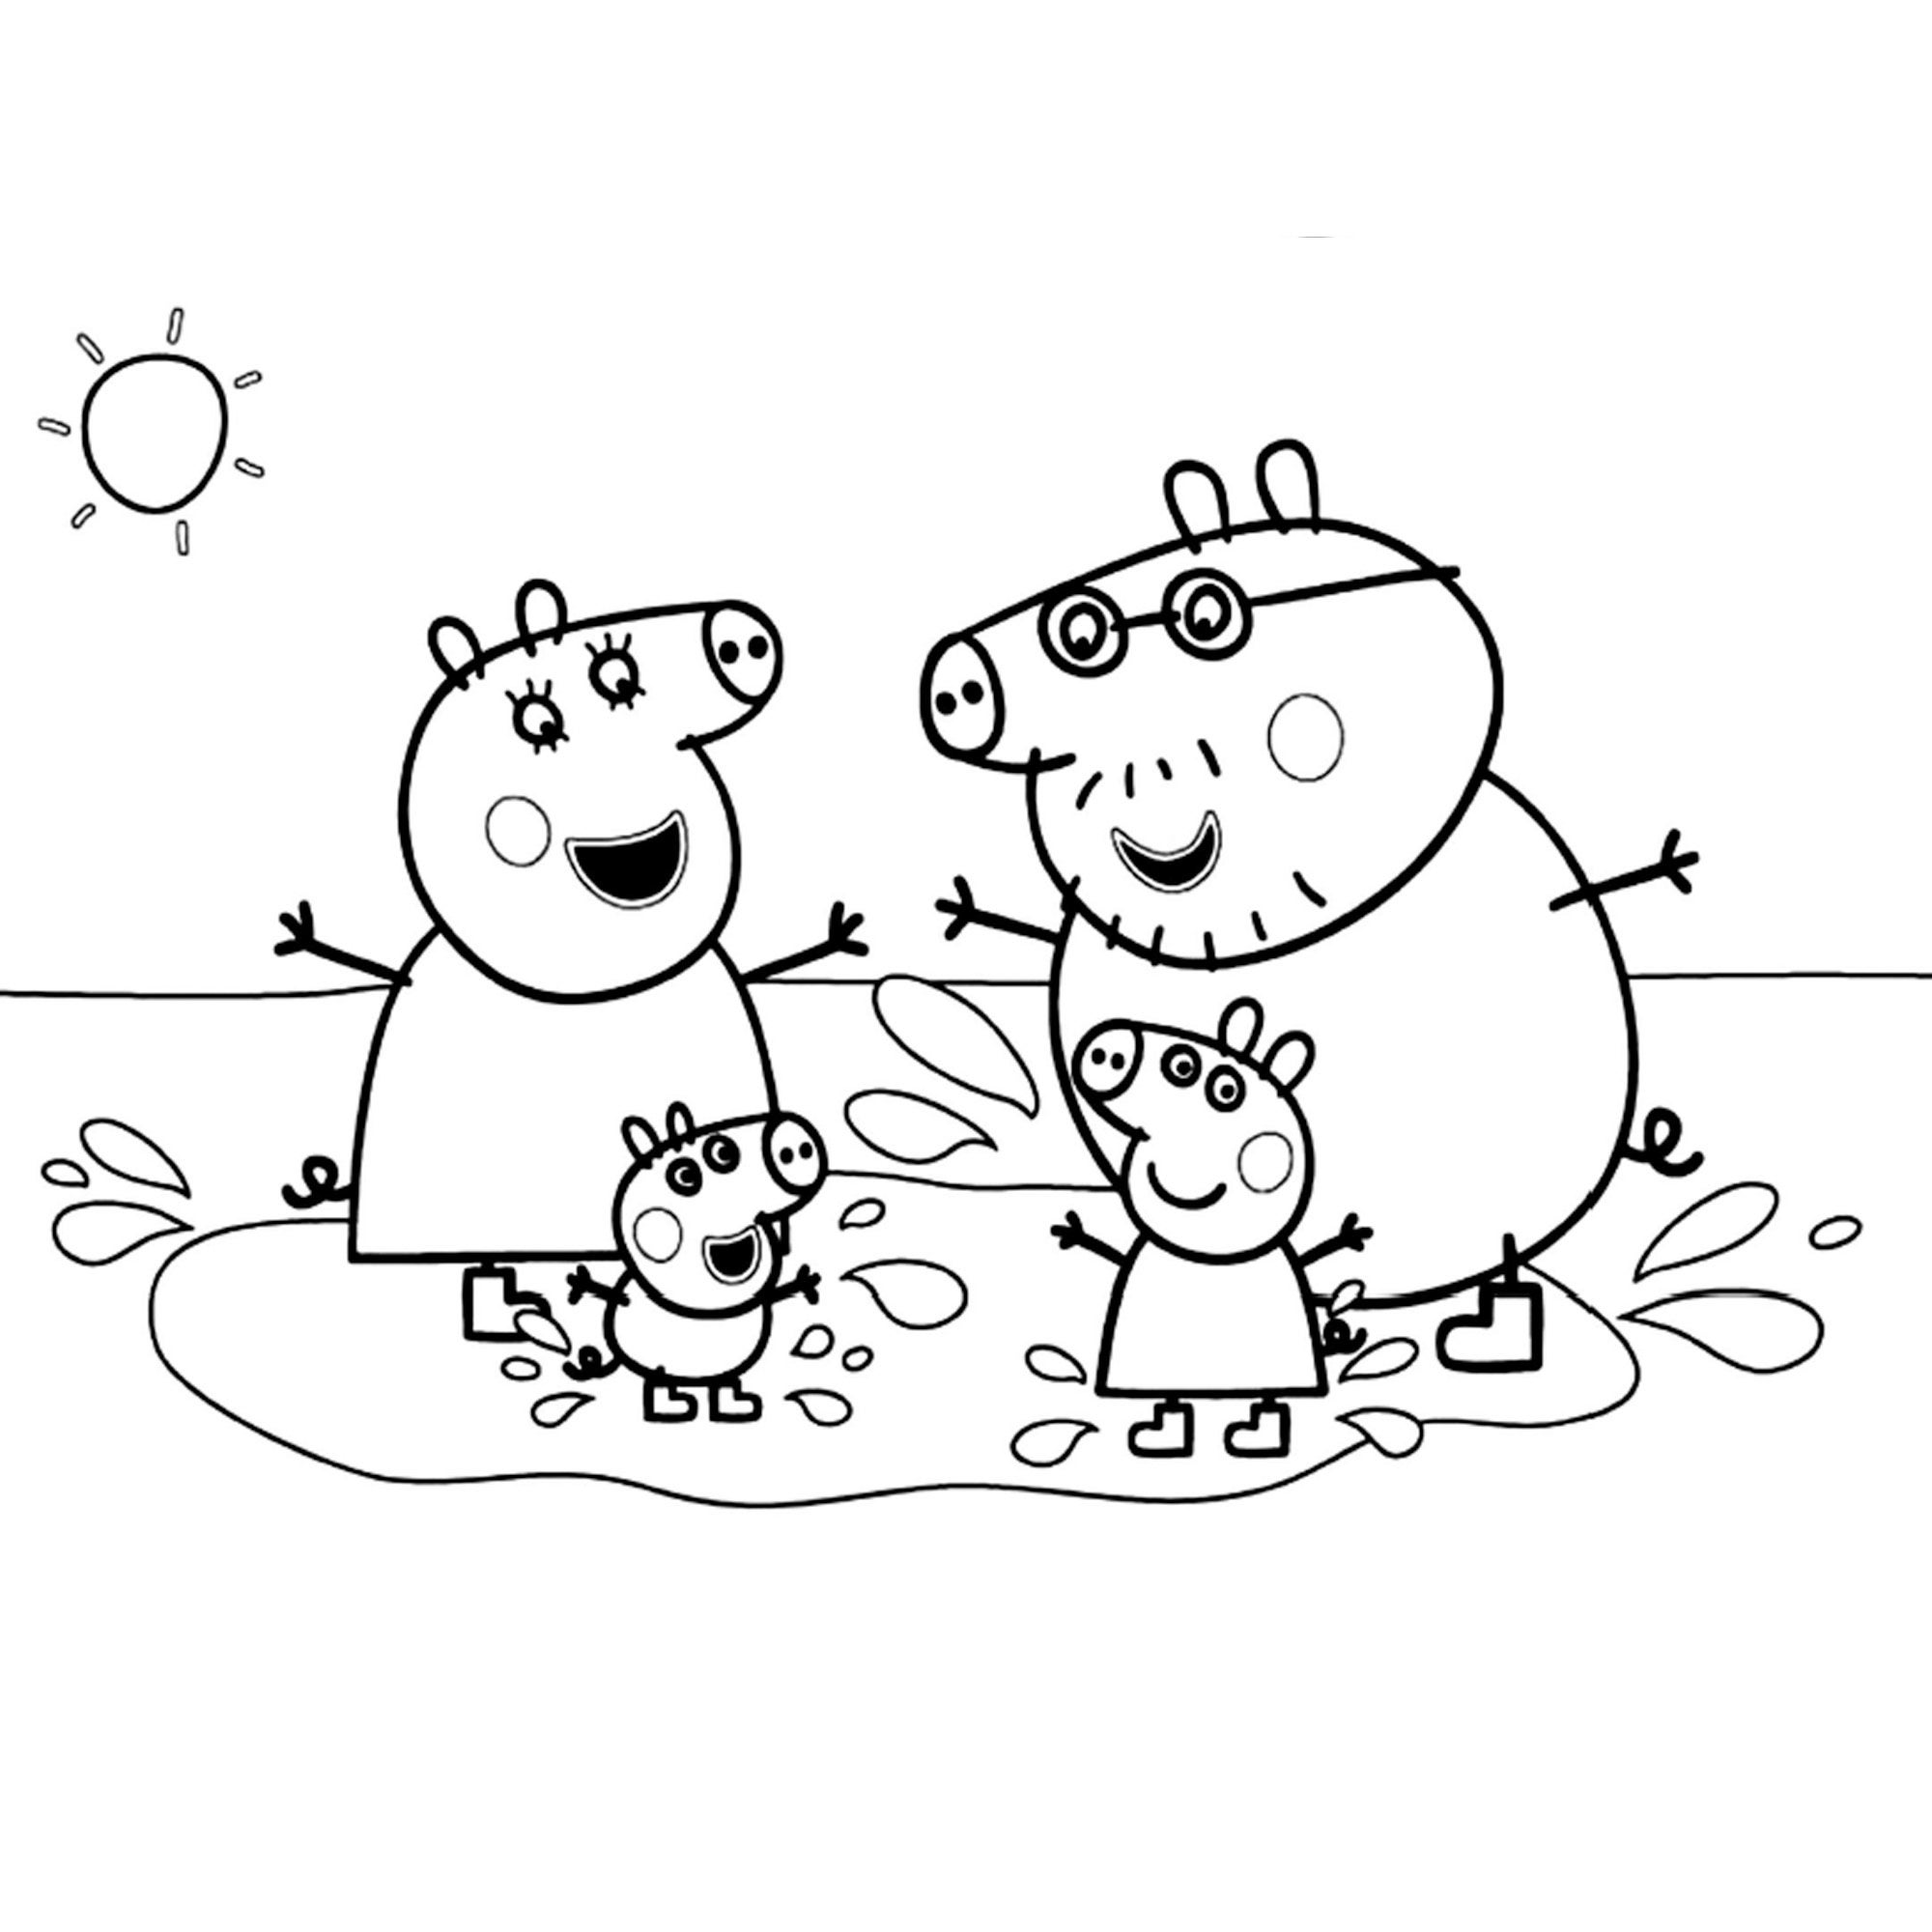 Printable Peppa Pig Coloring Pages For Kids - Ukup